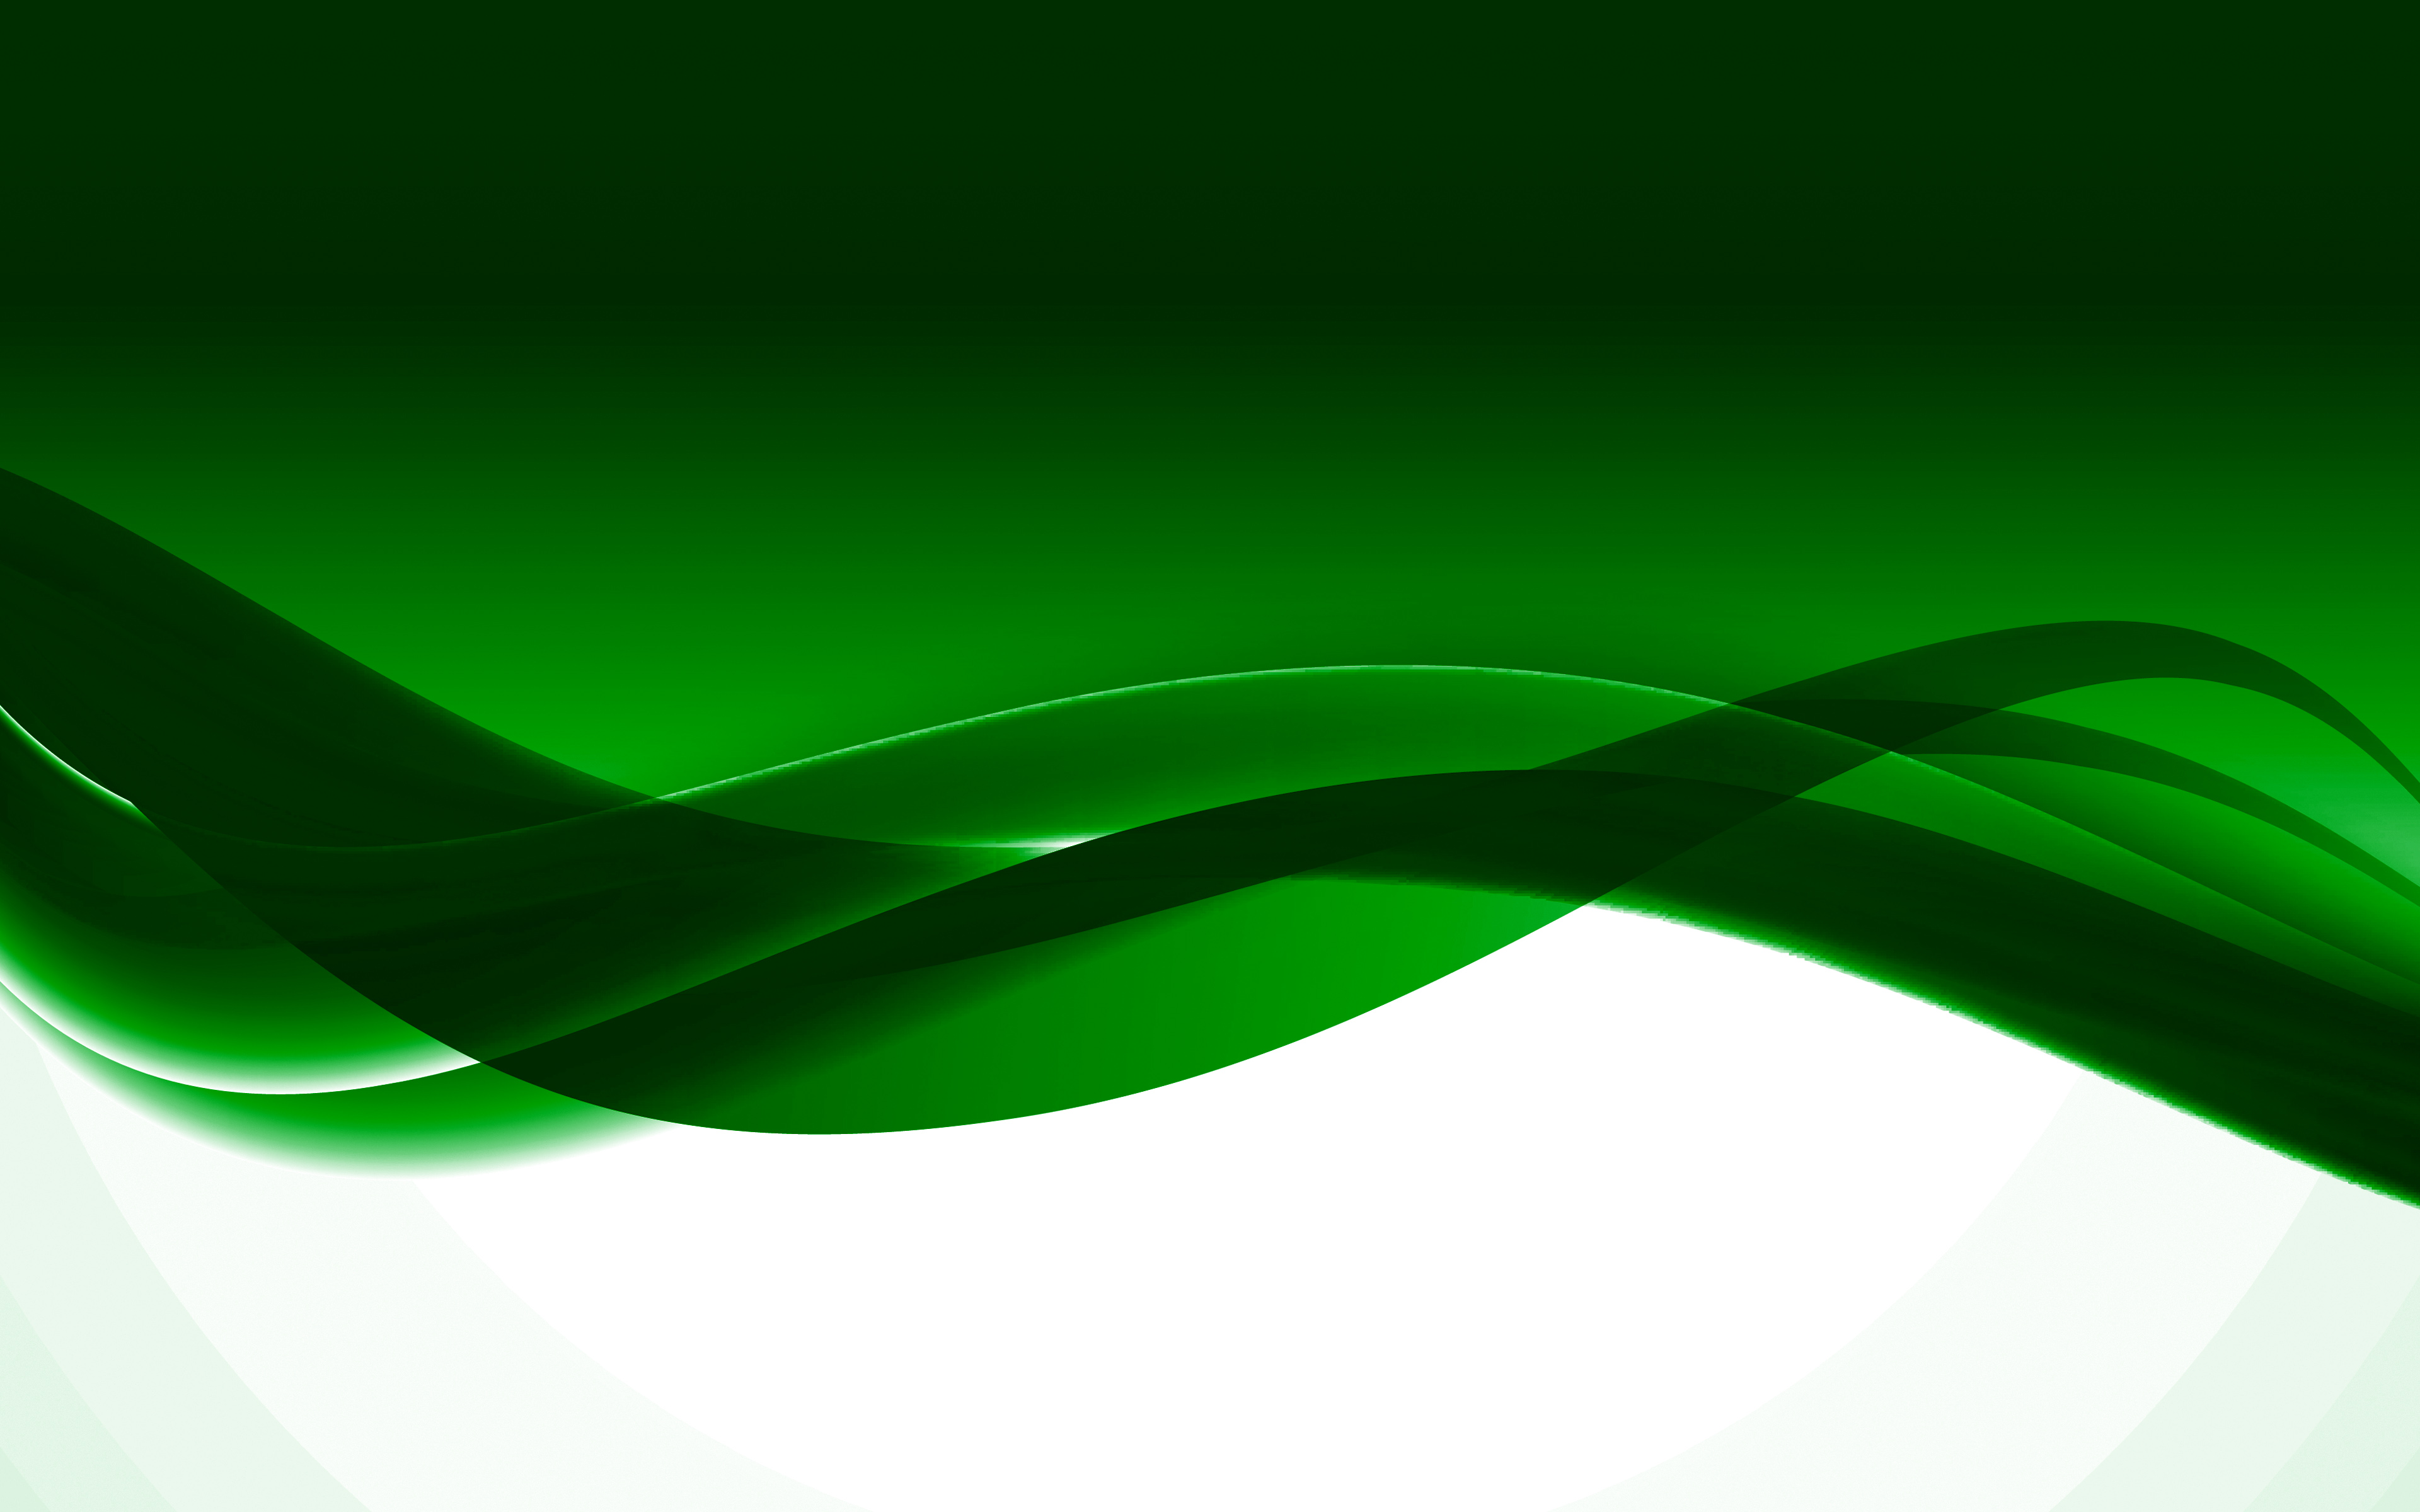 Download wallpaper Green wave background, 4k, green abstraction wave, waves background, creative green background, green lines background for desktop with resolution 3840x2400. High Quality HD picture wallpaper